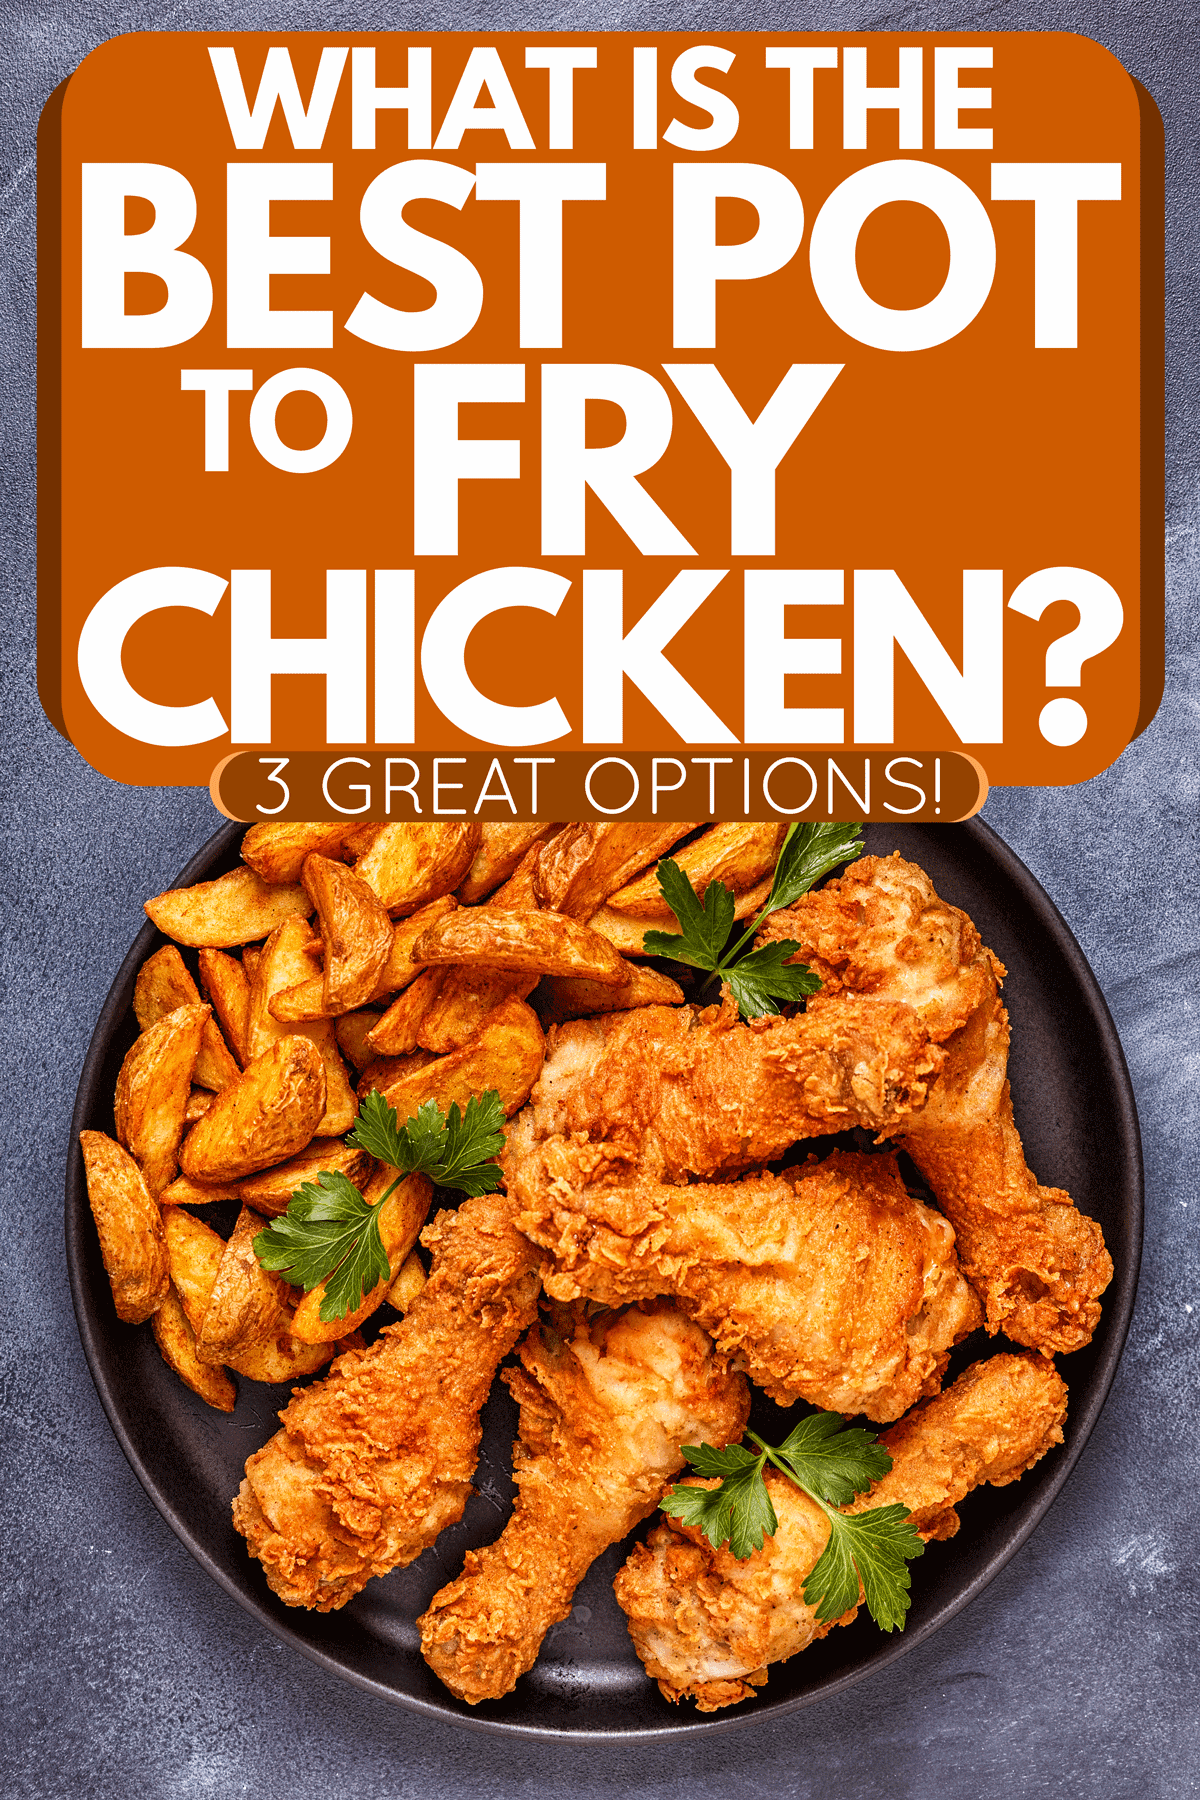 Golden brown deep fried chicken with fried potatoes on the side, What is the Best Pot to Fry Chicken? [3 Great Options!]